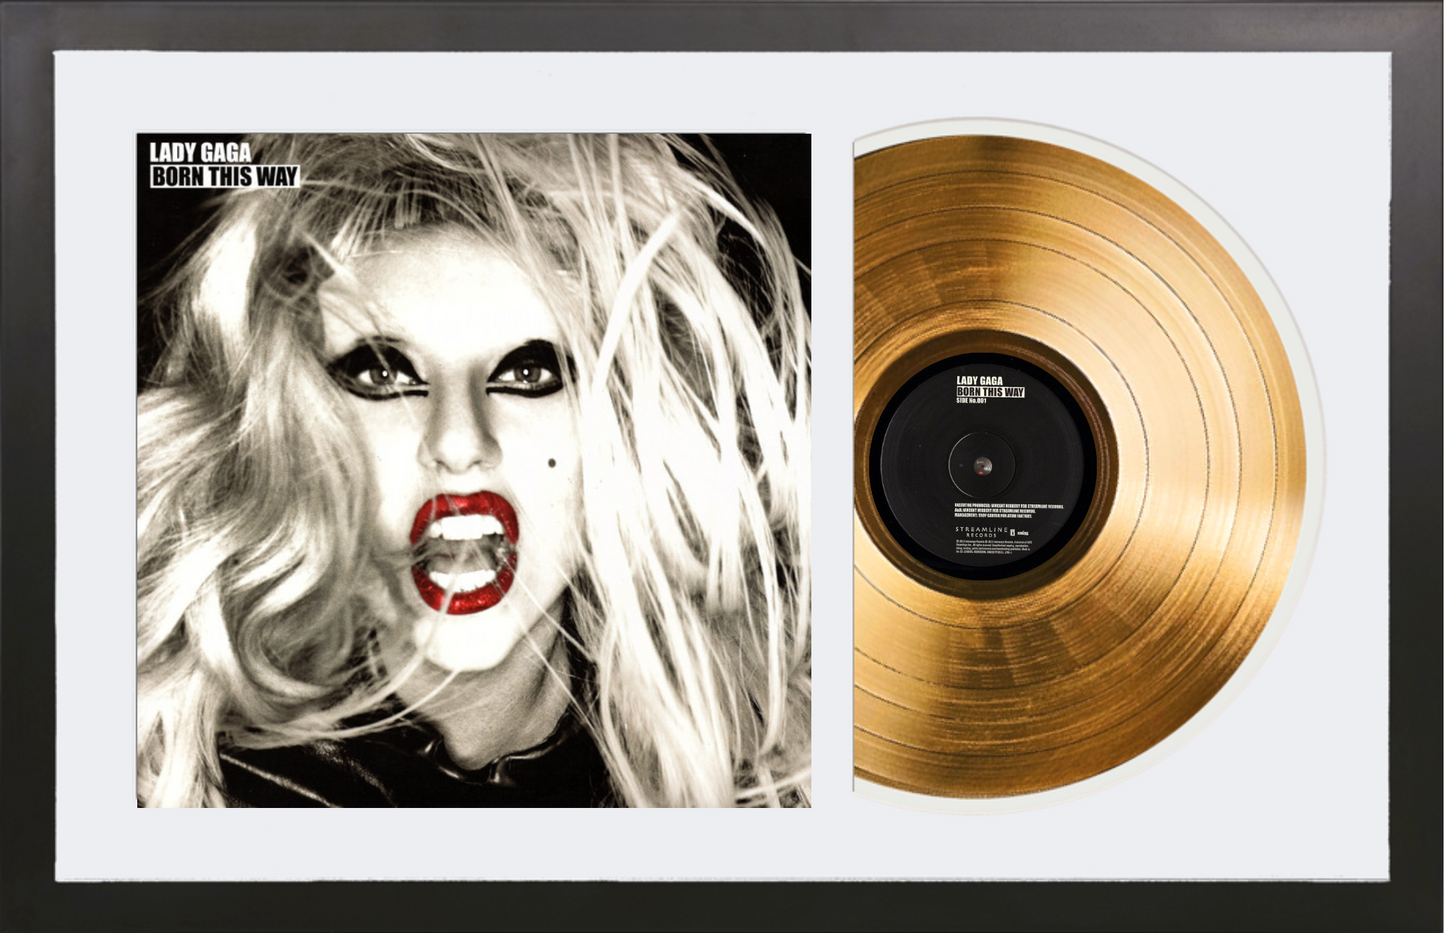 Lady Gaga - Born This Way - 14K Gold Plated, Limited Edition Album